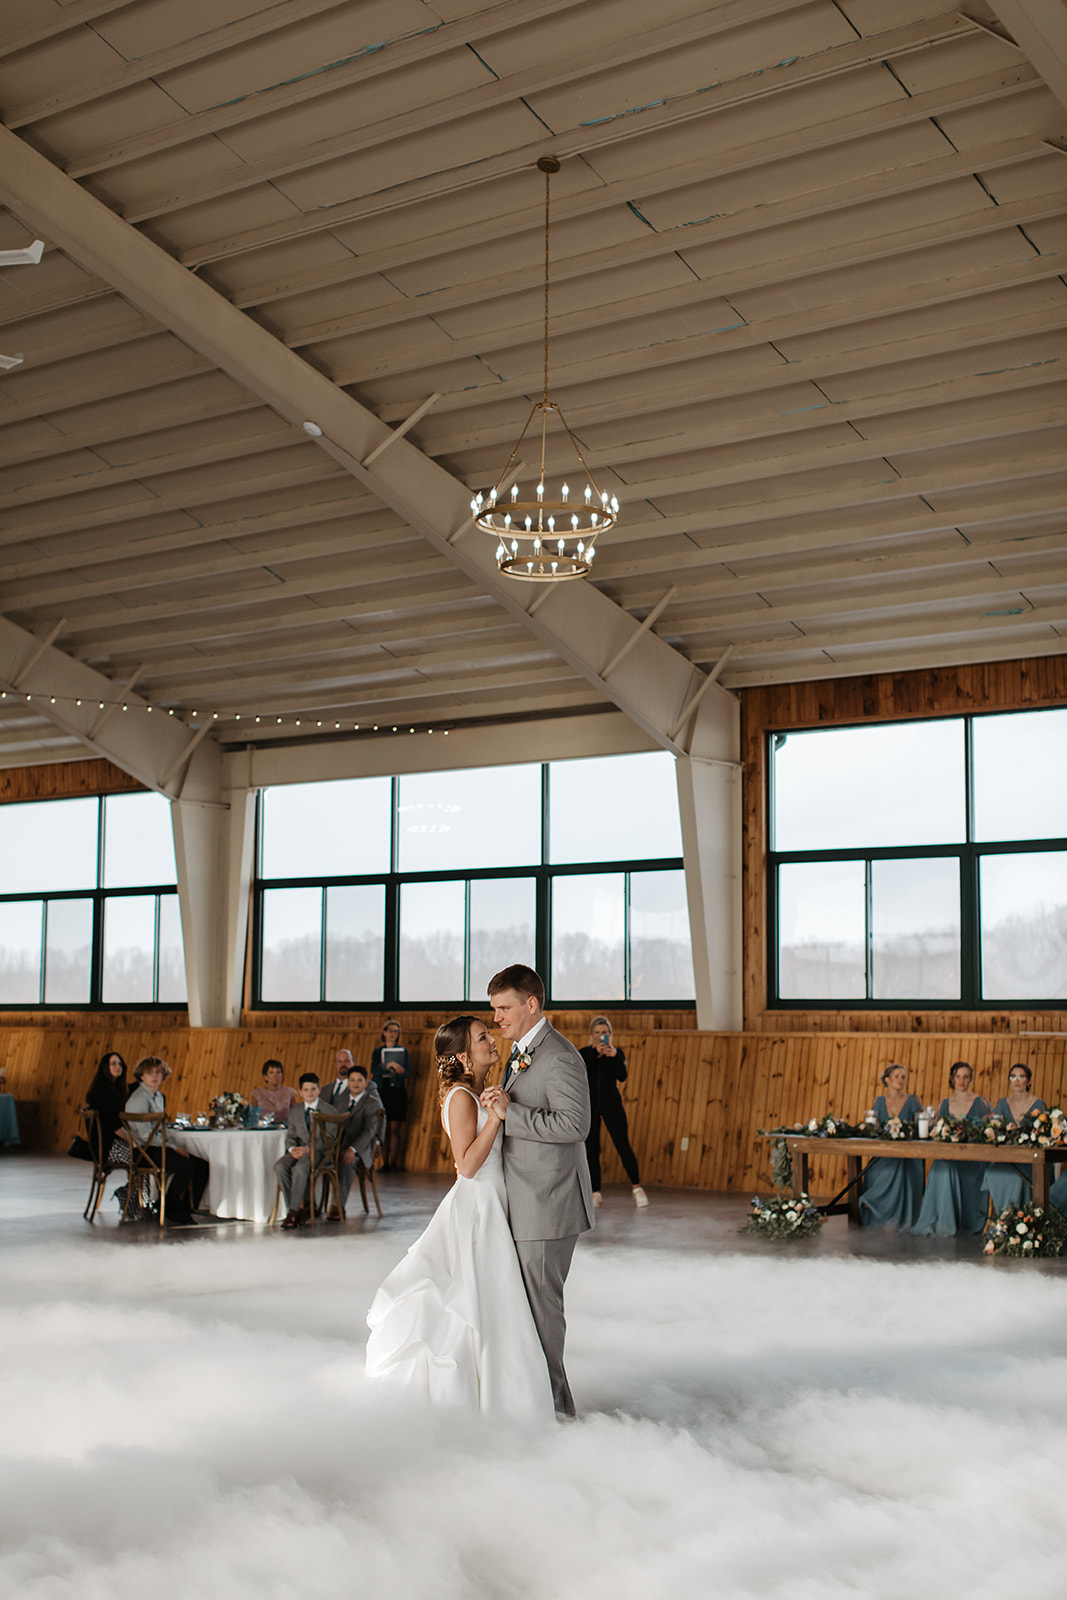 the bride and grooms first dance at Vignon Manor Farm